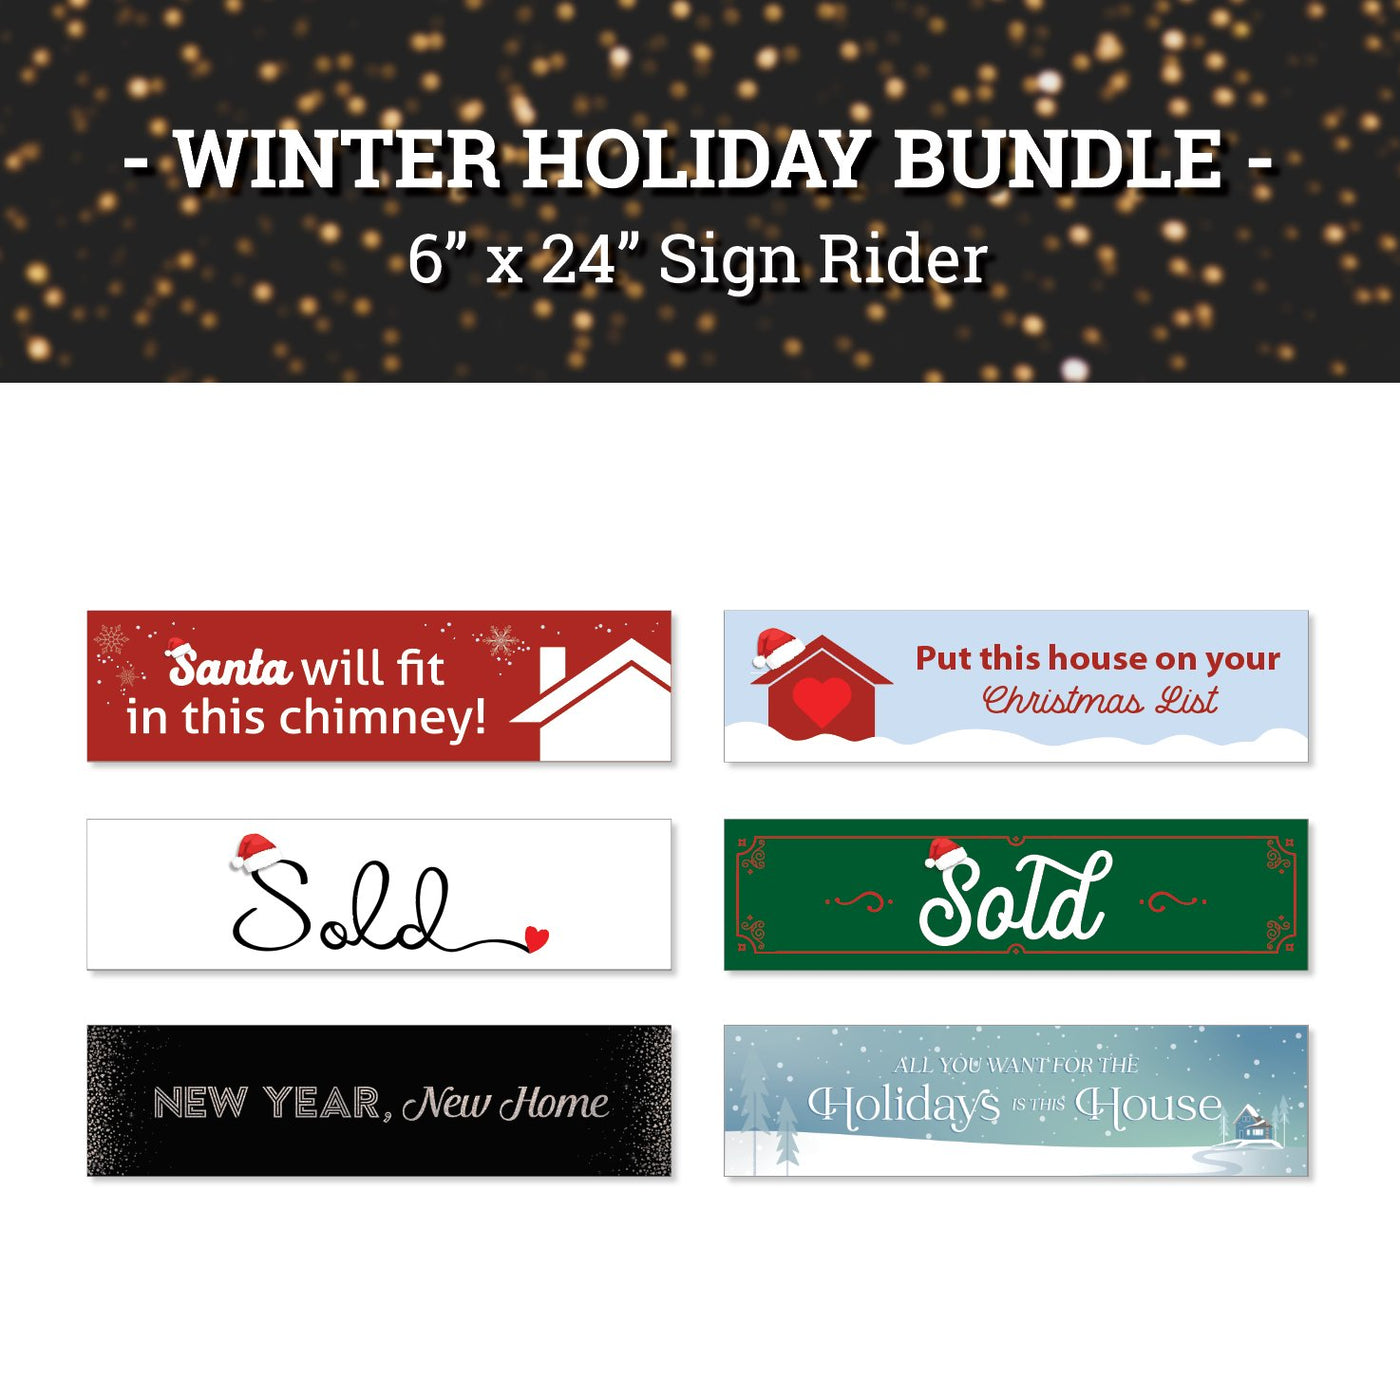 Winter Holiday Rider Bundle - All Things Real Estate